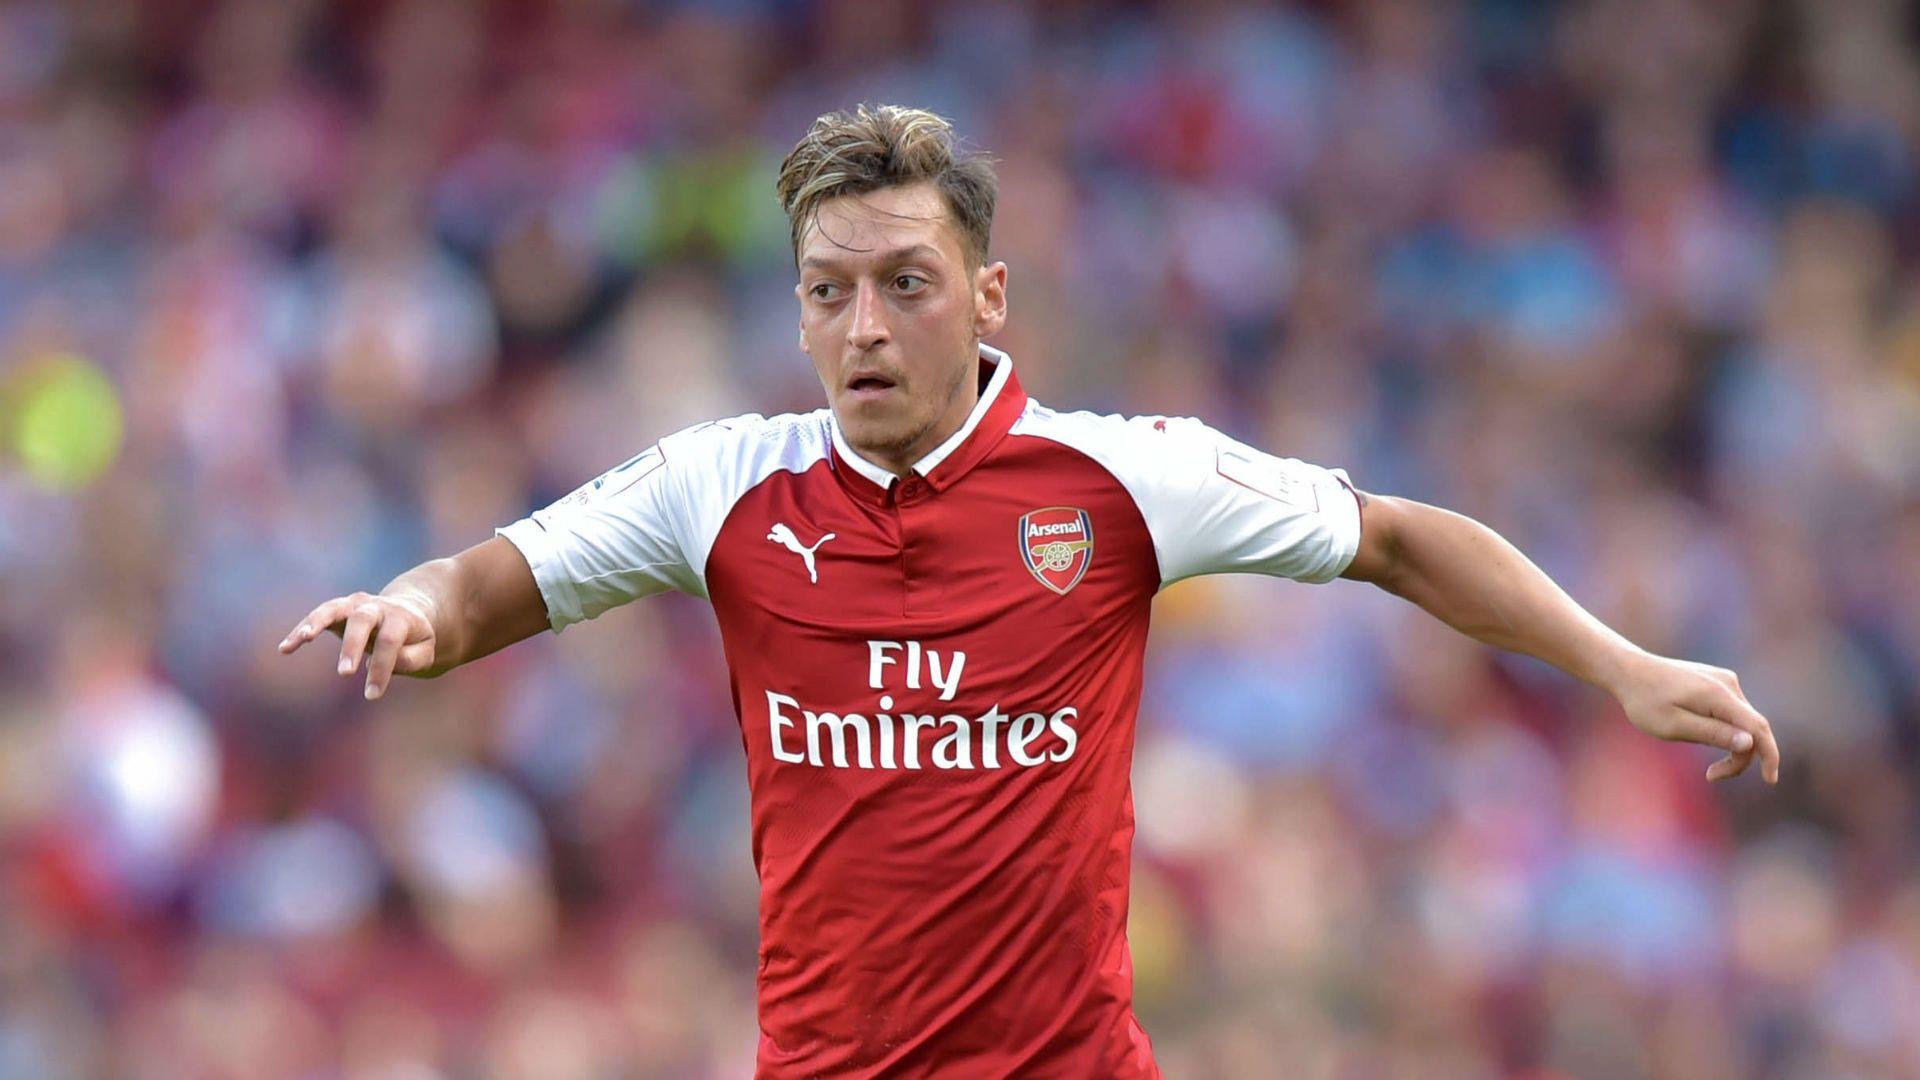 Barcelona and United are keen on signing Mesut Ozil